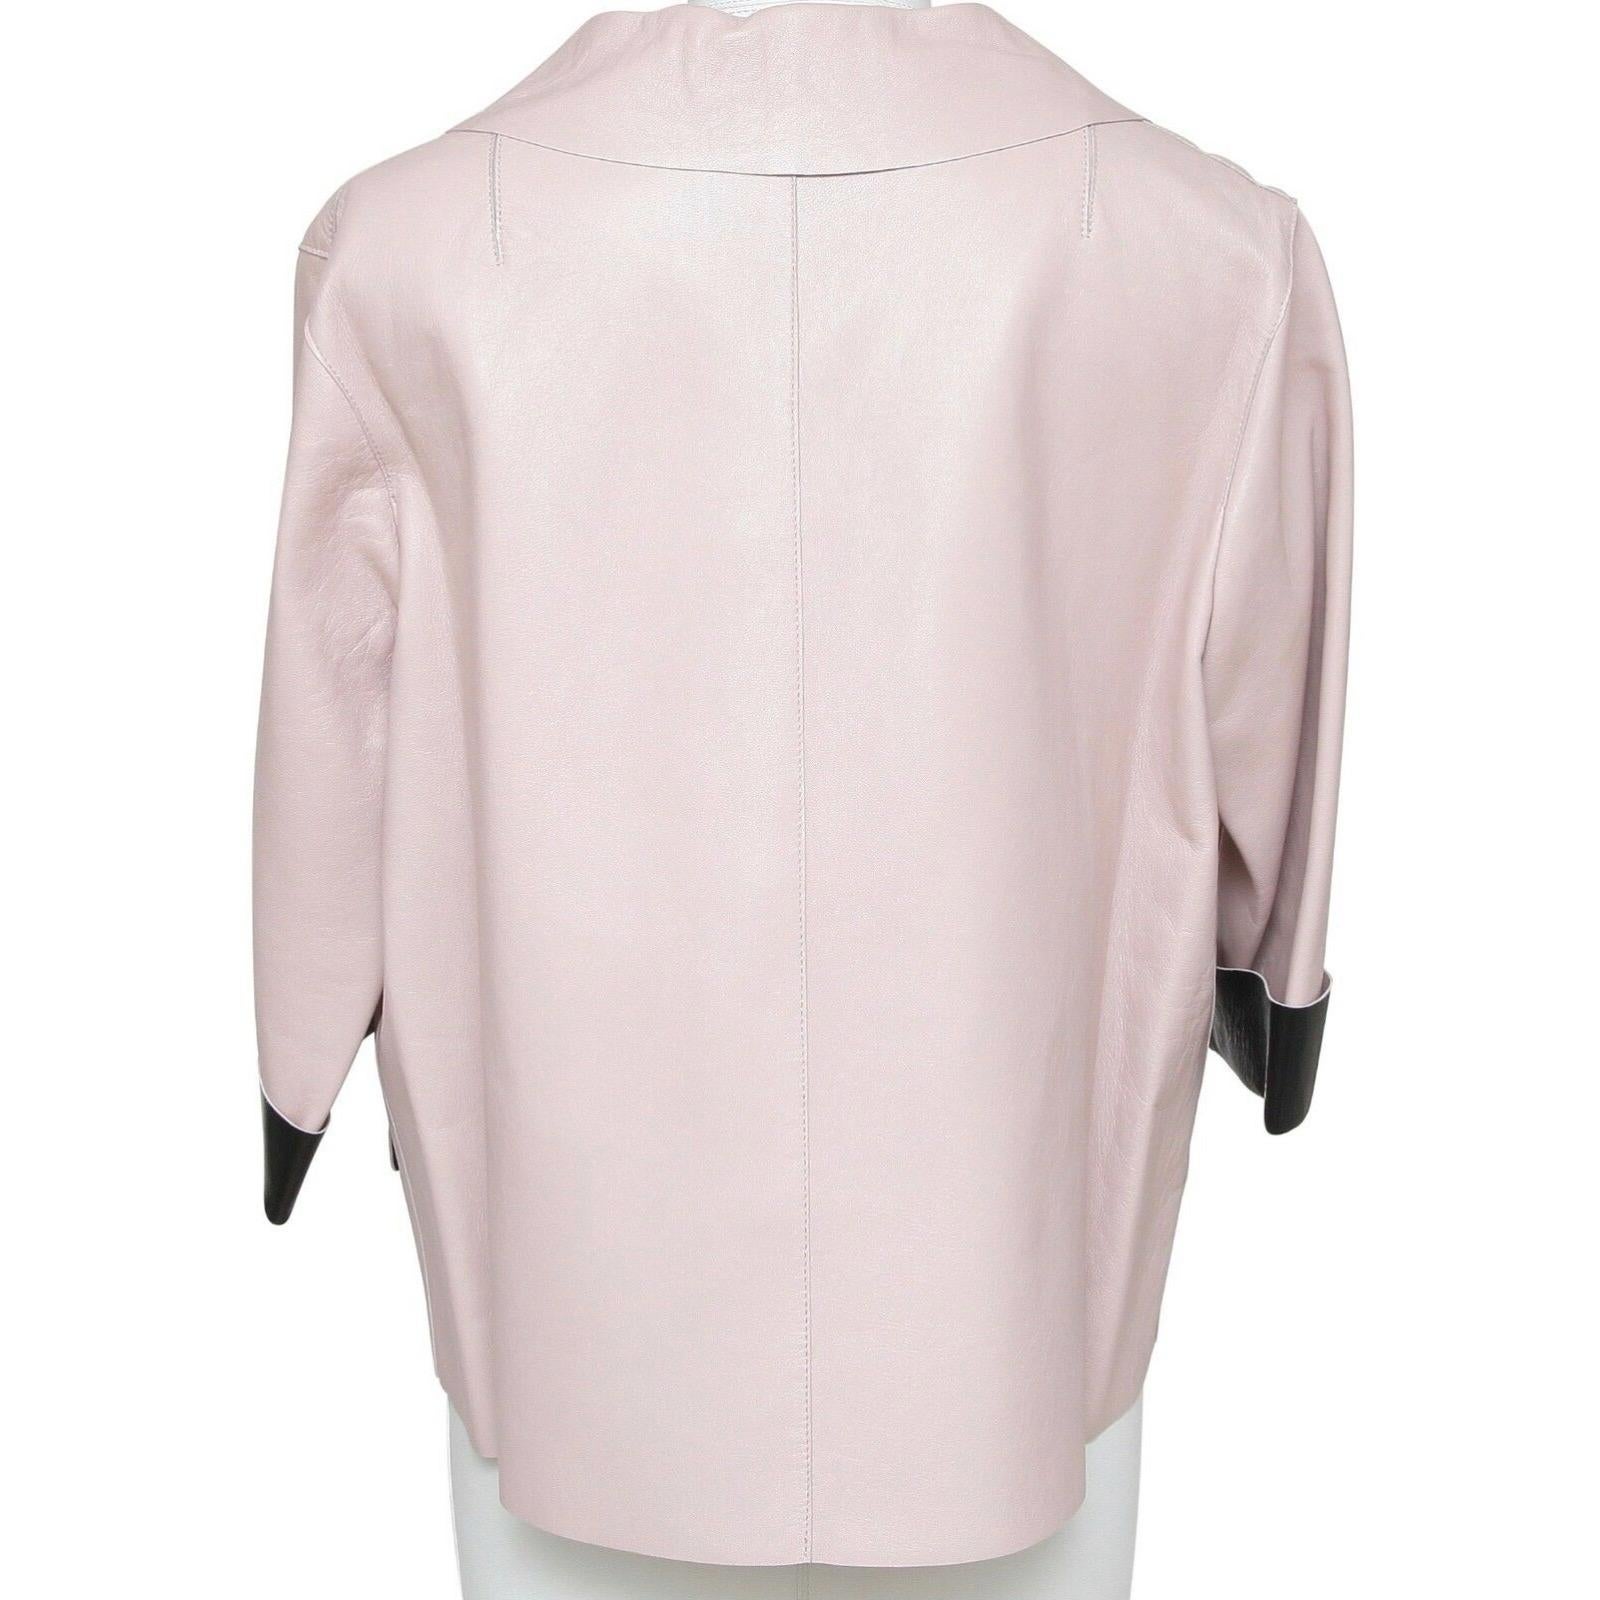 MARNI Jacket Leather Coat Blush Pink Black 3/4 Sleeve Pocket Sz 44 Summer 2014 In New Condition For Sale In Hollywood, FL